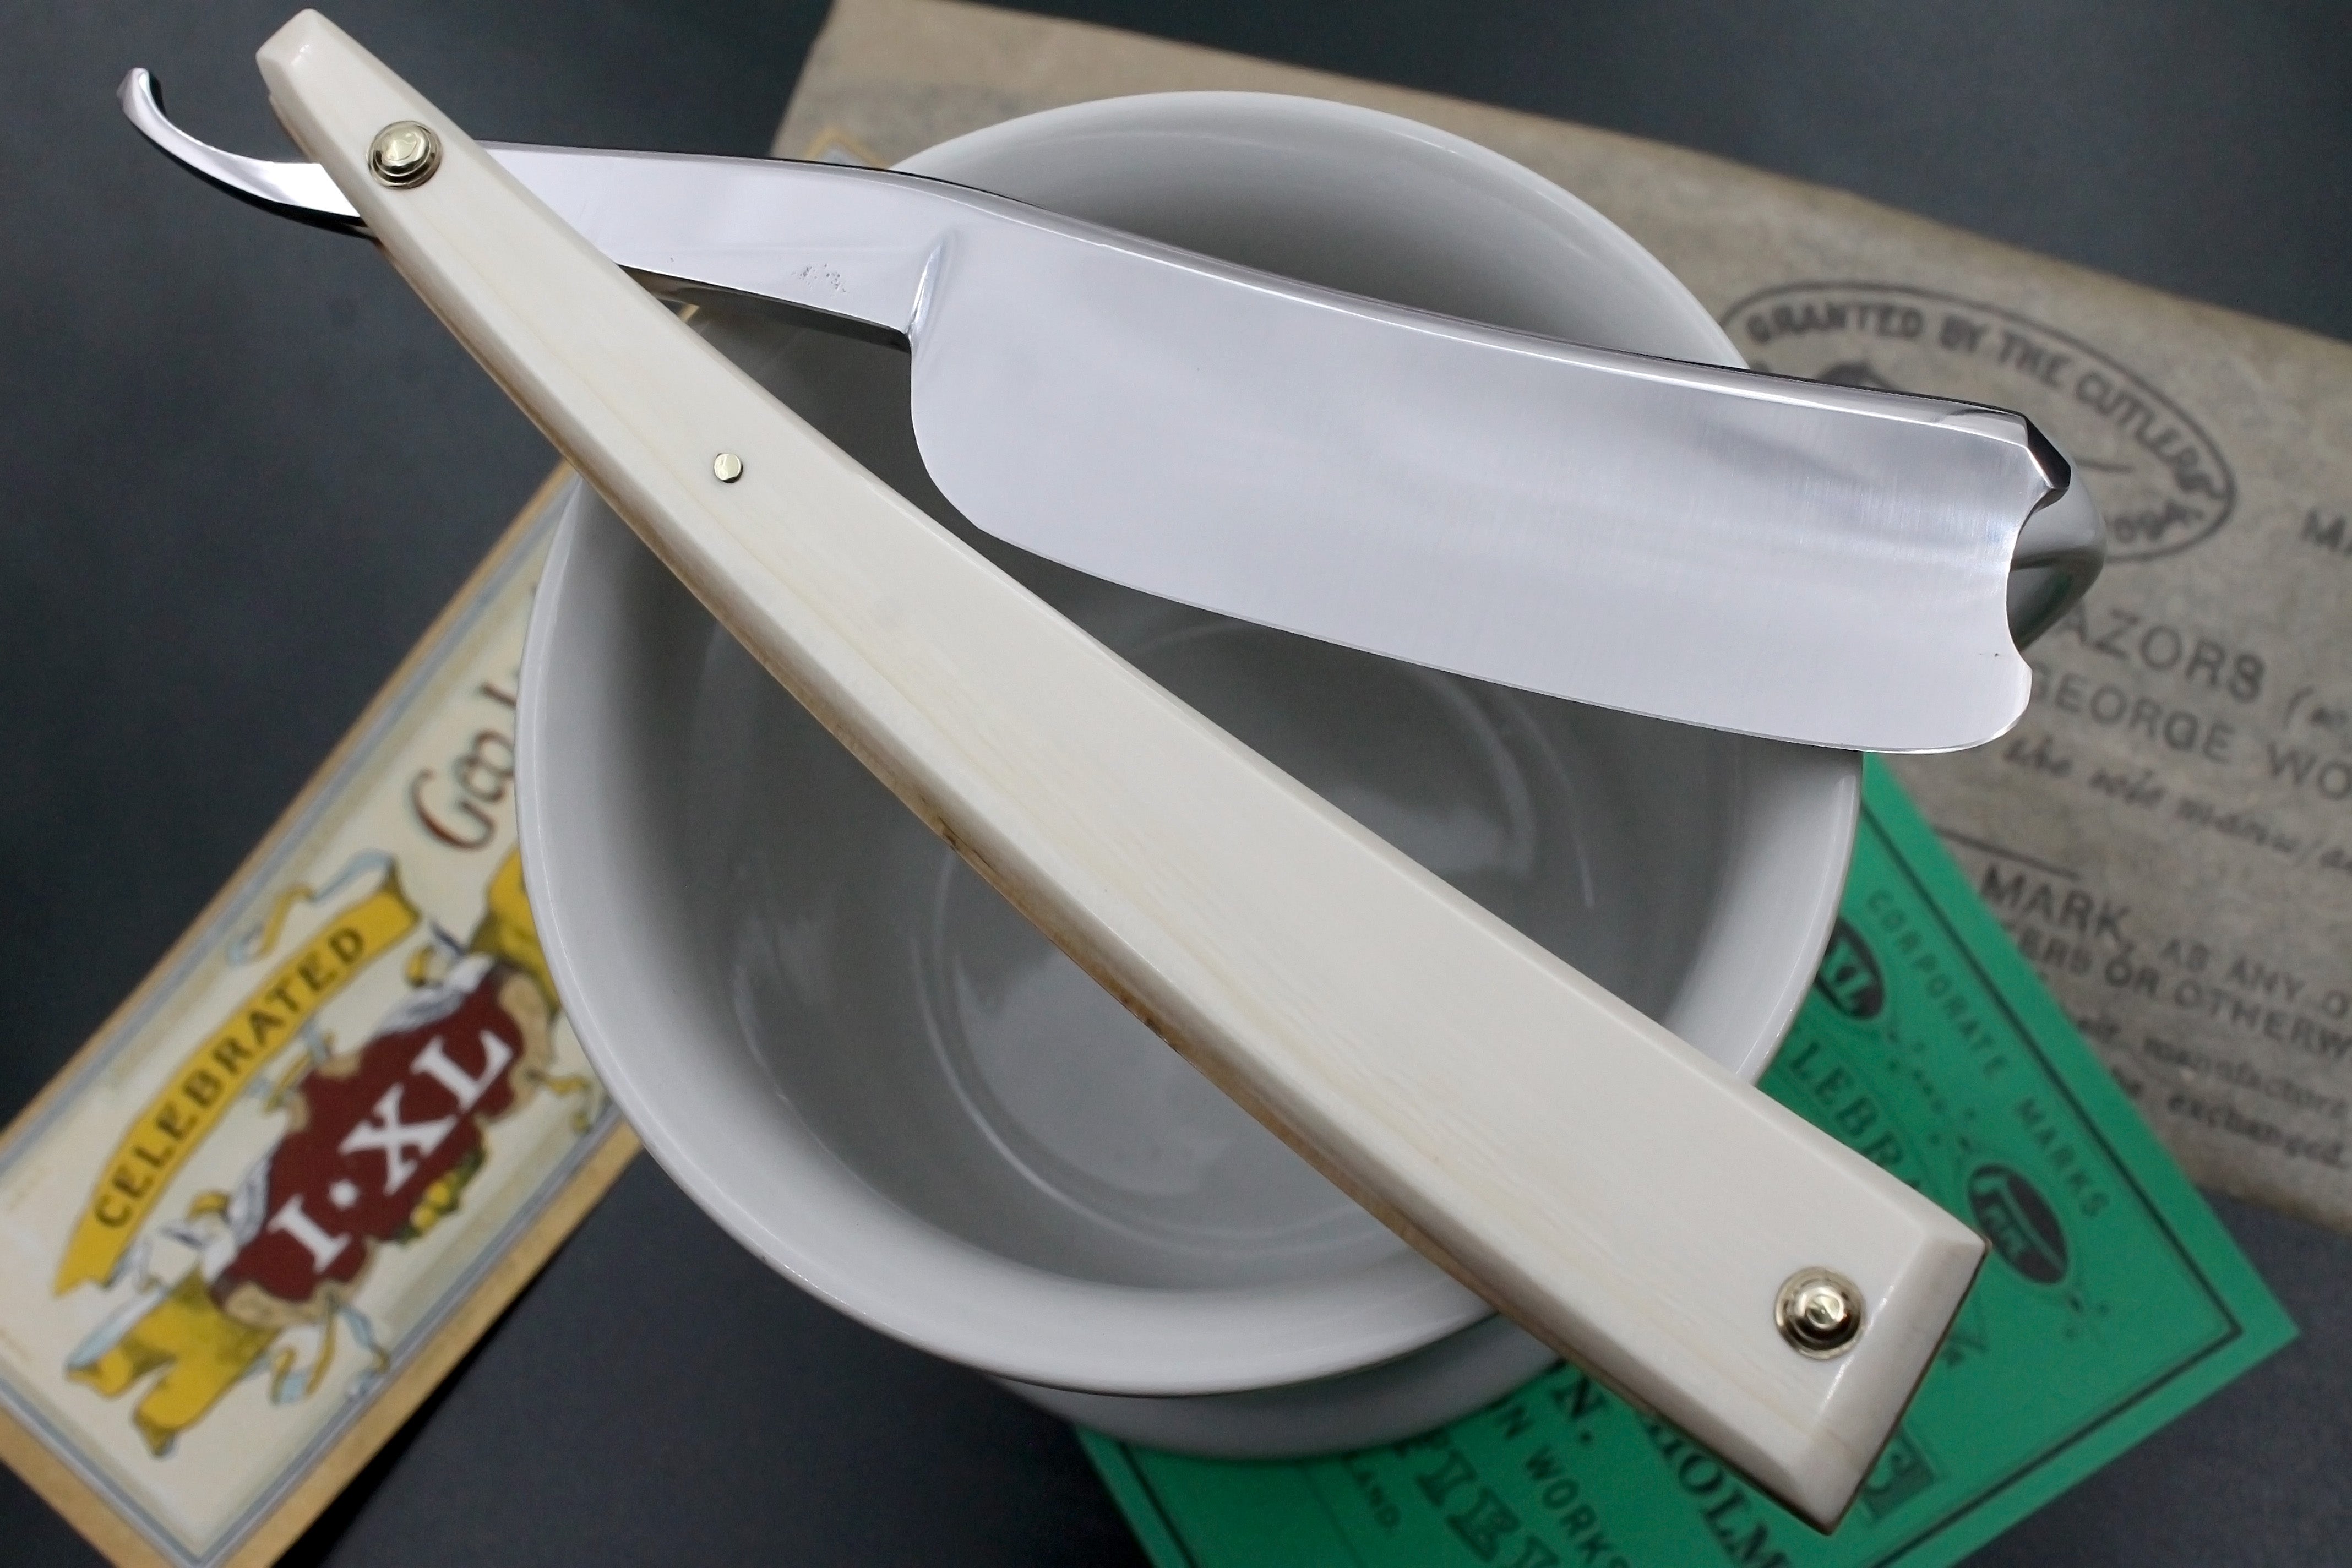 Wade & Butcher "For Barbers Use" - 8/8 1" Blade with Custom Mammoth Ivory Scales - Stunning Fully Restored Sheffield Straight Razor - Shave Ready